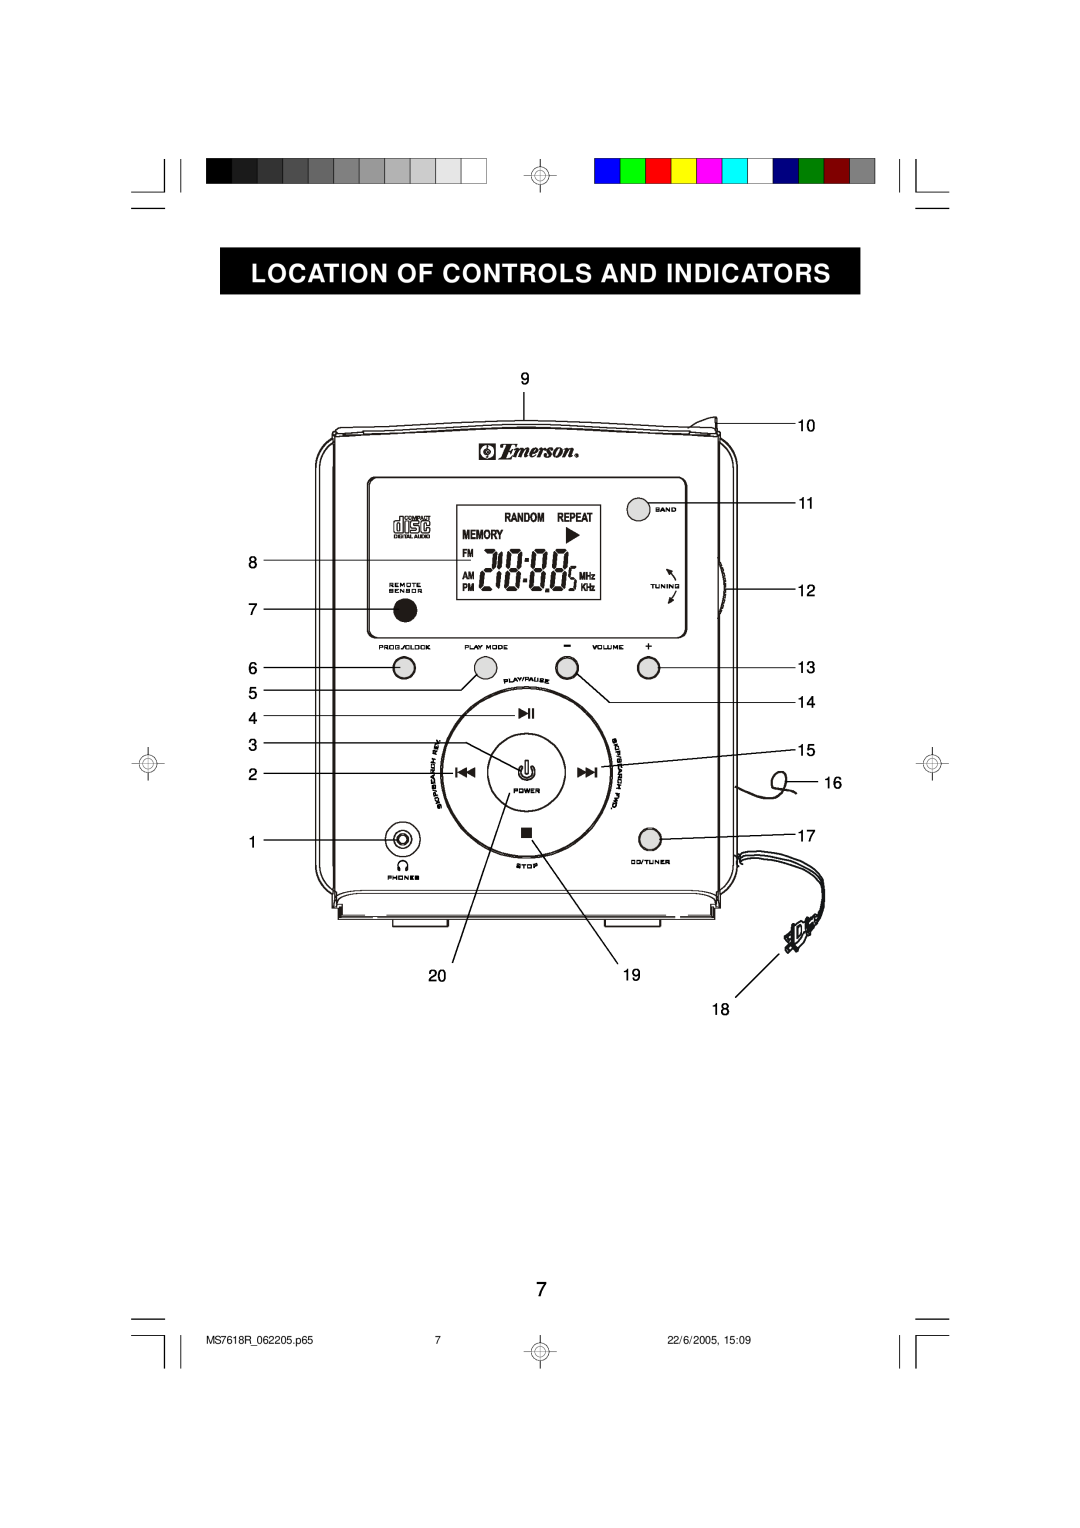 Emerson owner manual Location Of Controls And Indicators, MS7618R 062205.p65, 22/6/2005 